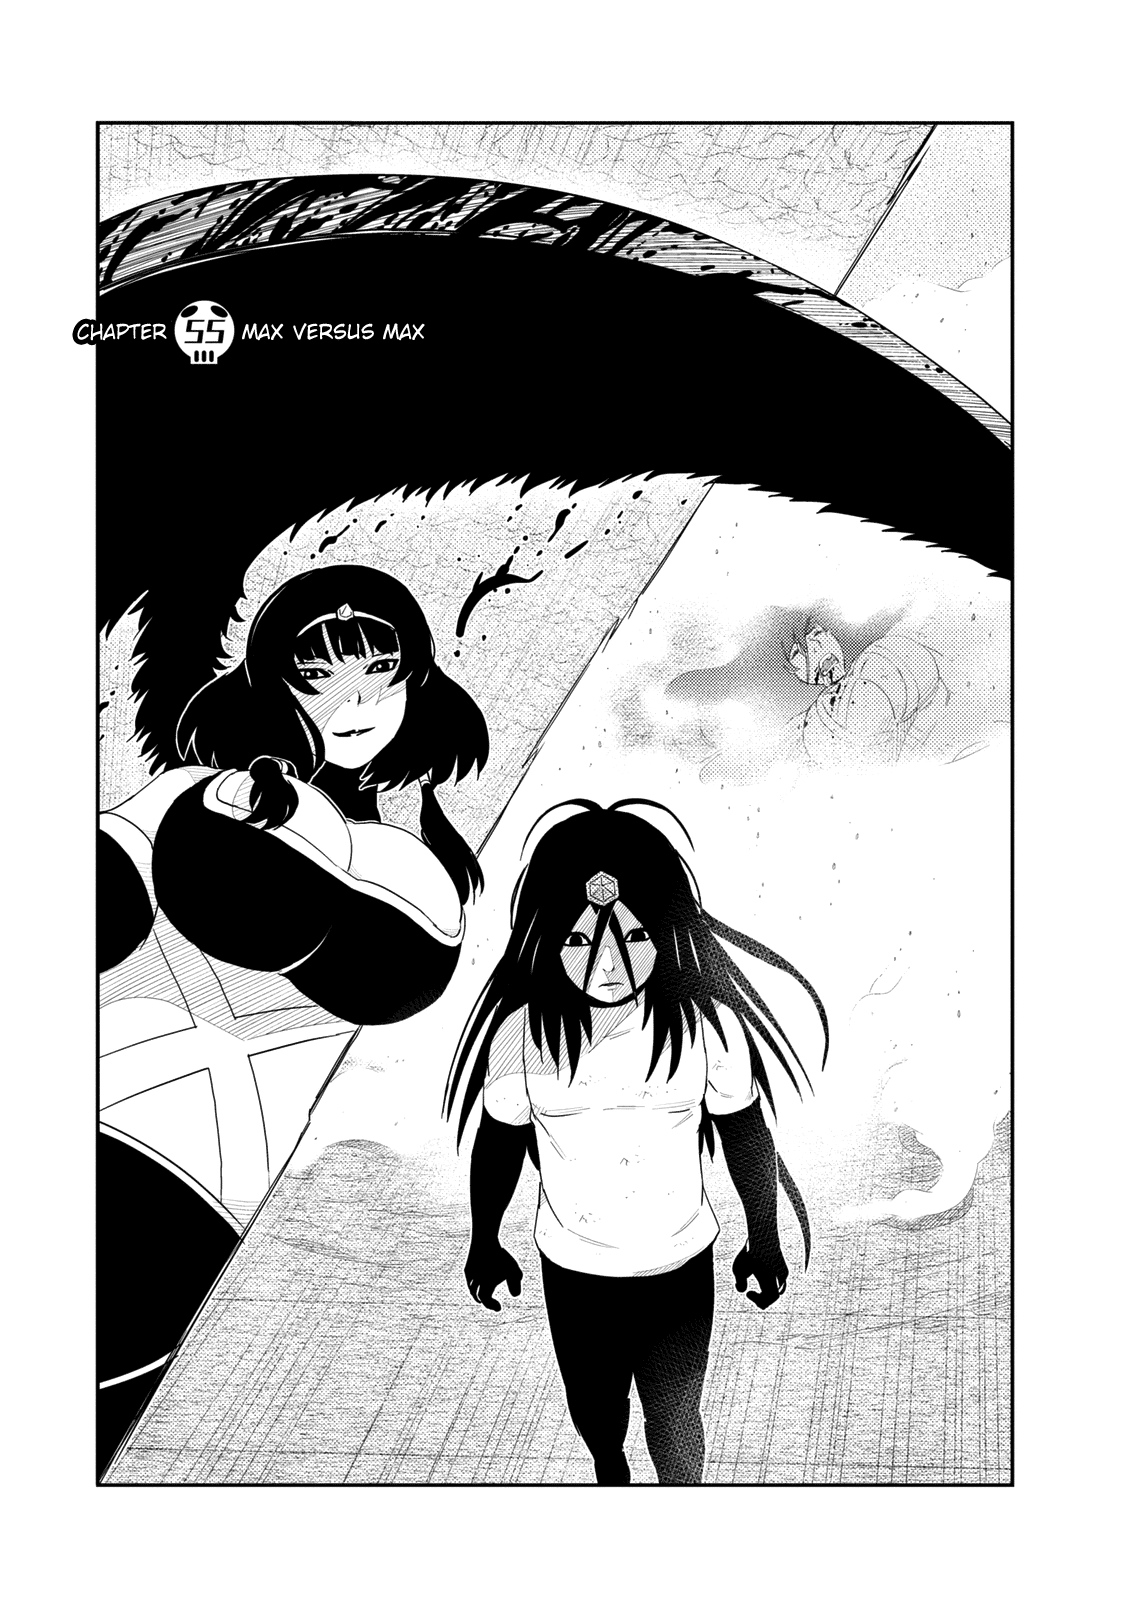 Youkai Banchou Chapter 55: Max Versus Max - Picture 1